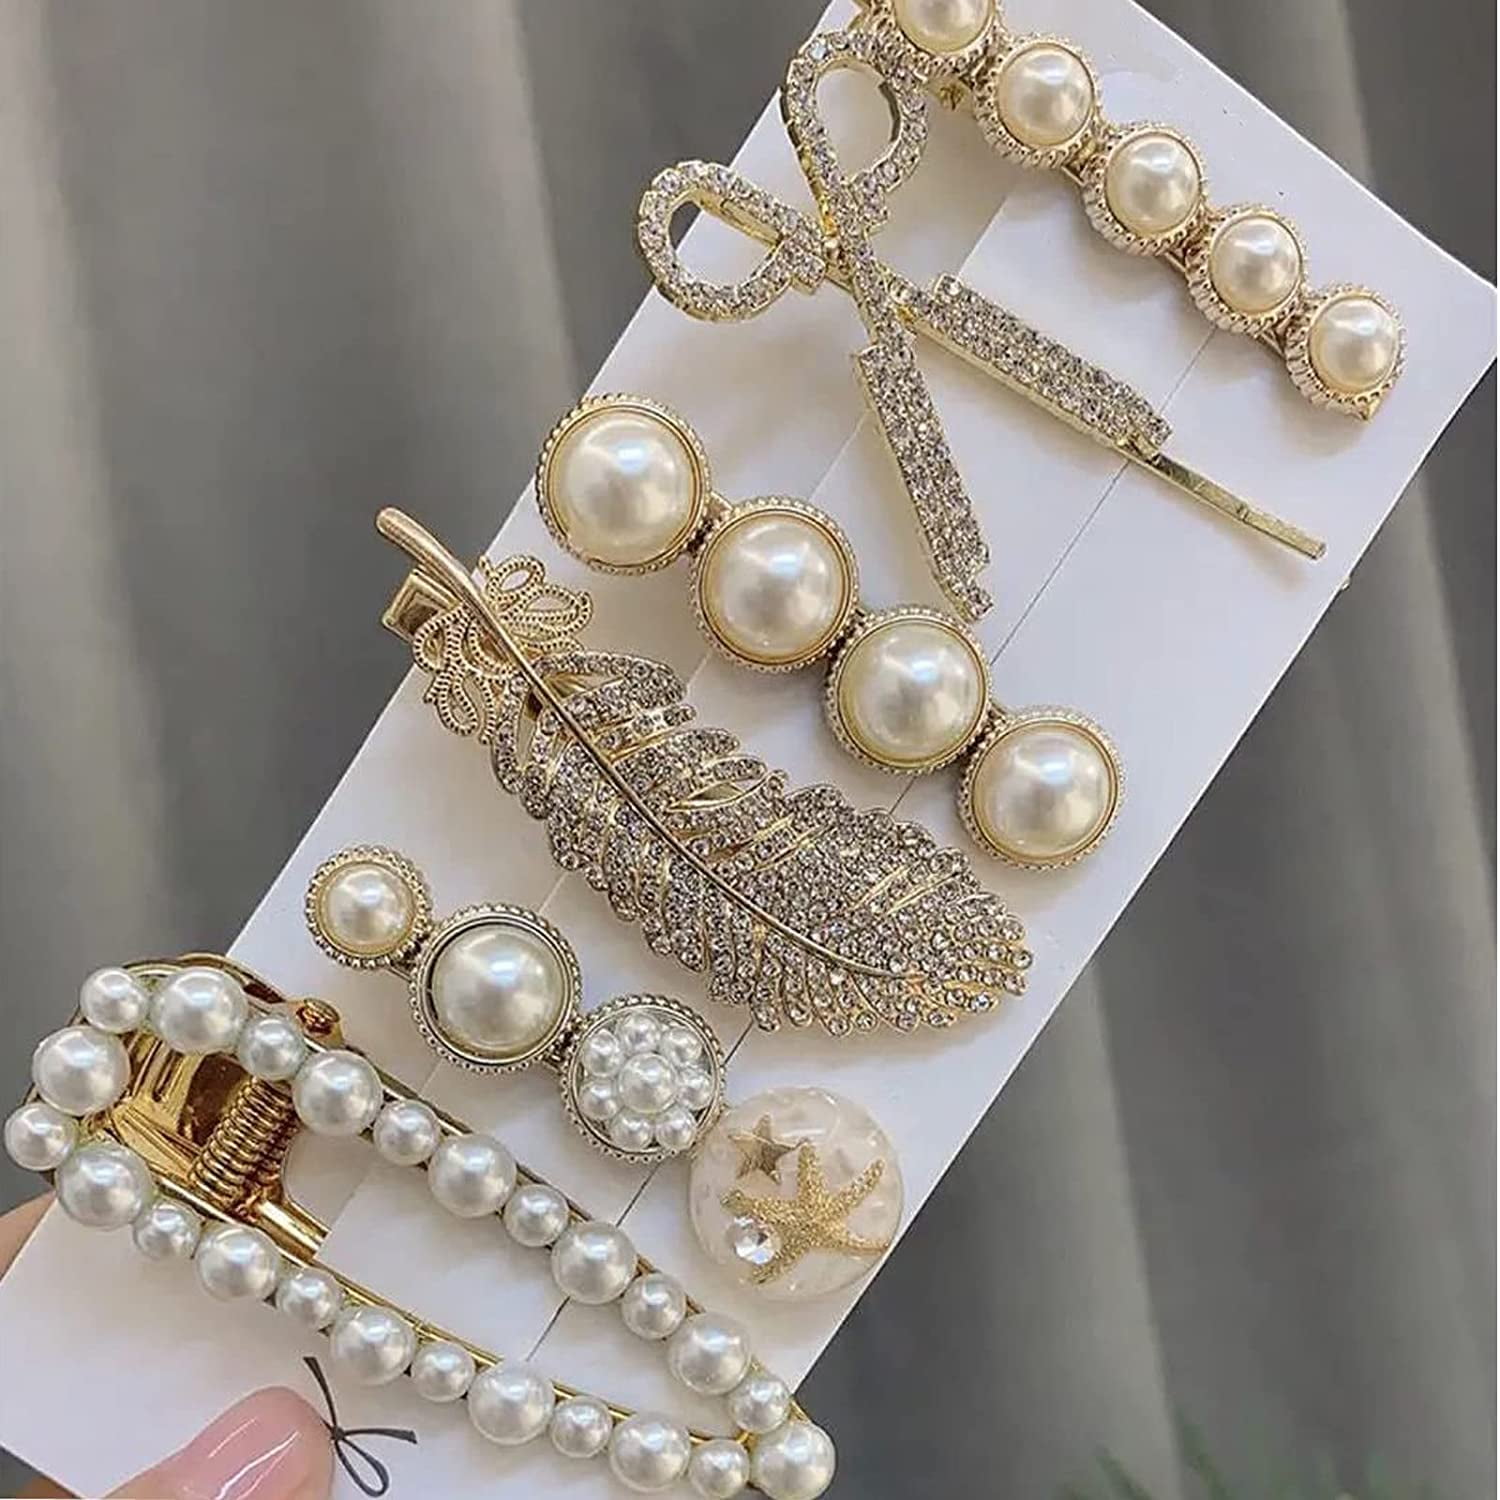 Crystal Pearl Barrette Hairpin Hair Clip Stick Snap Accessories Women Girls Gift 